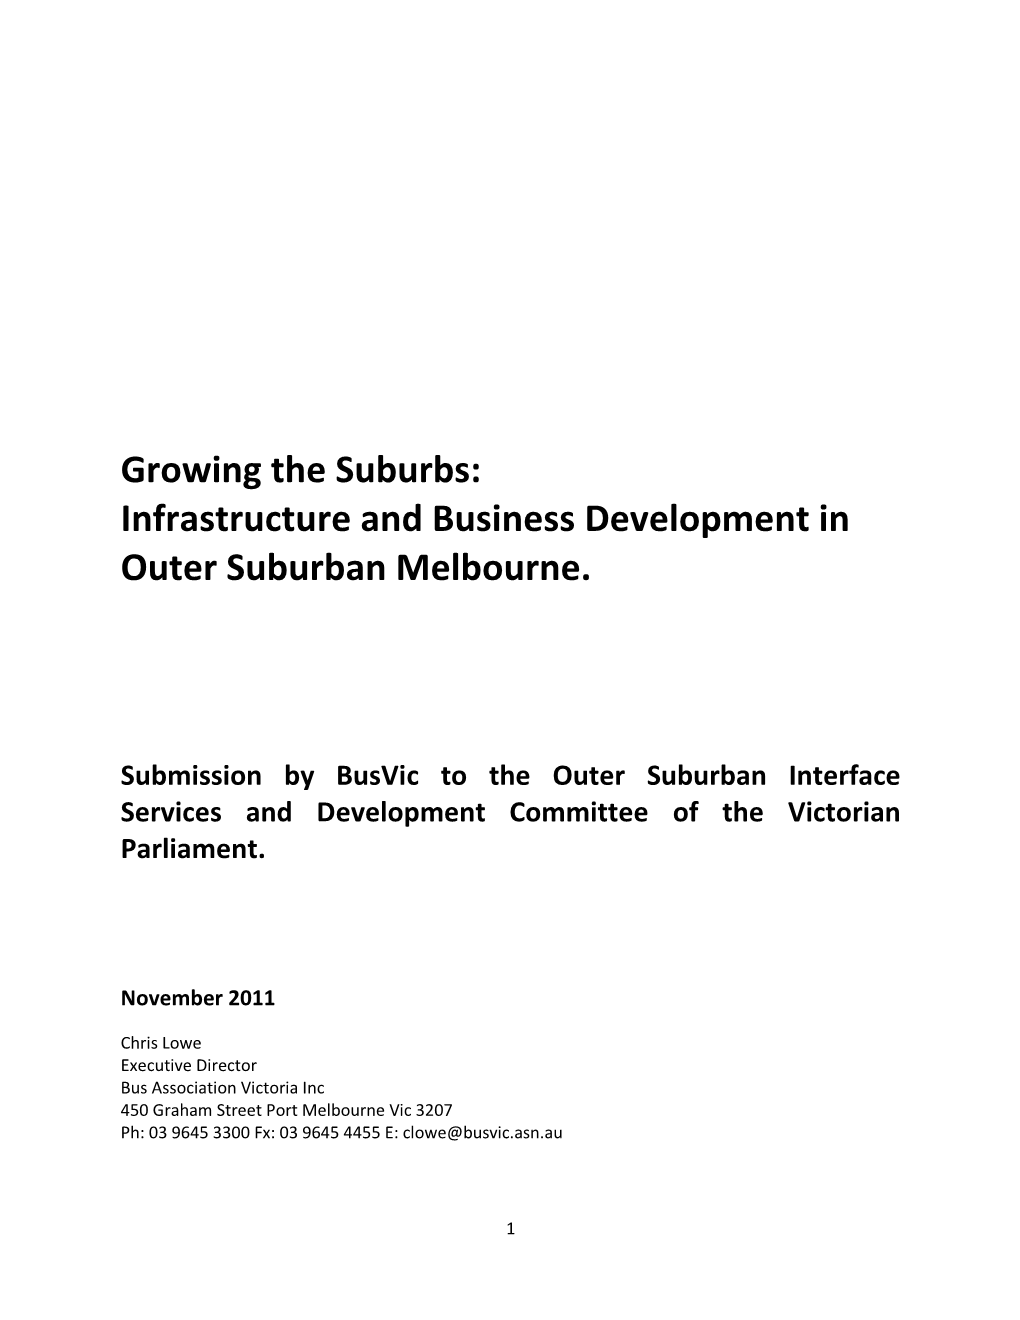 Growing the Suburbs: Infrastructure and Business Development in Outer Suburban Melbourne